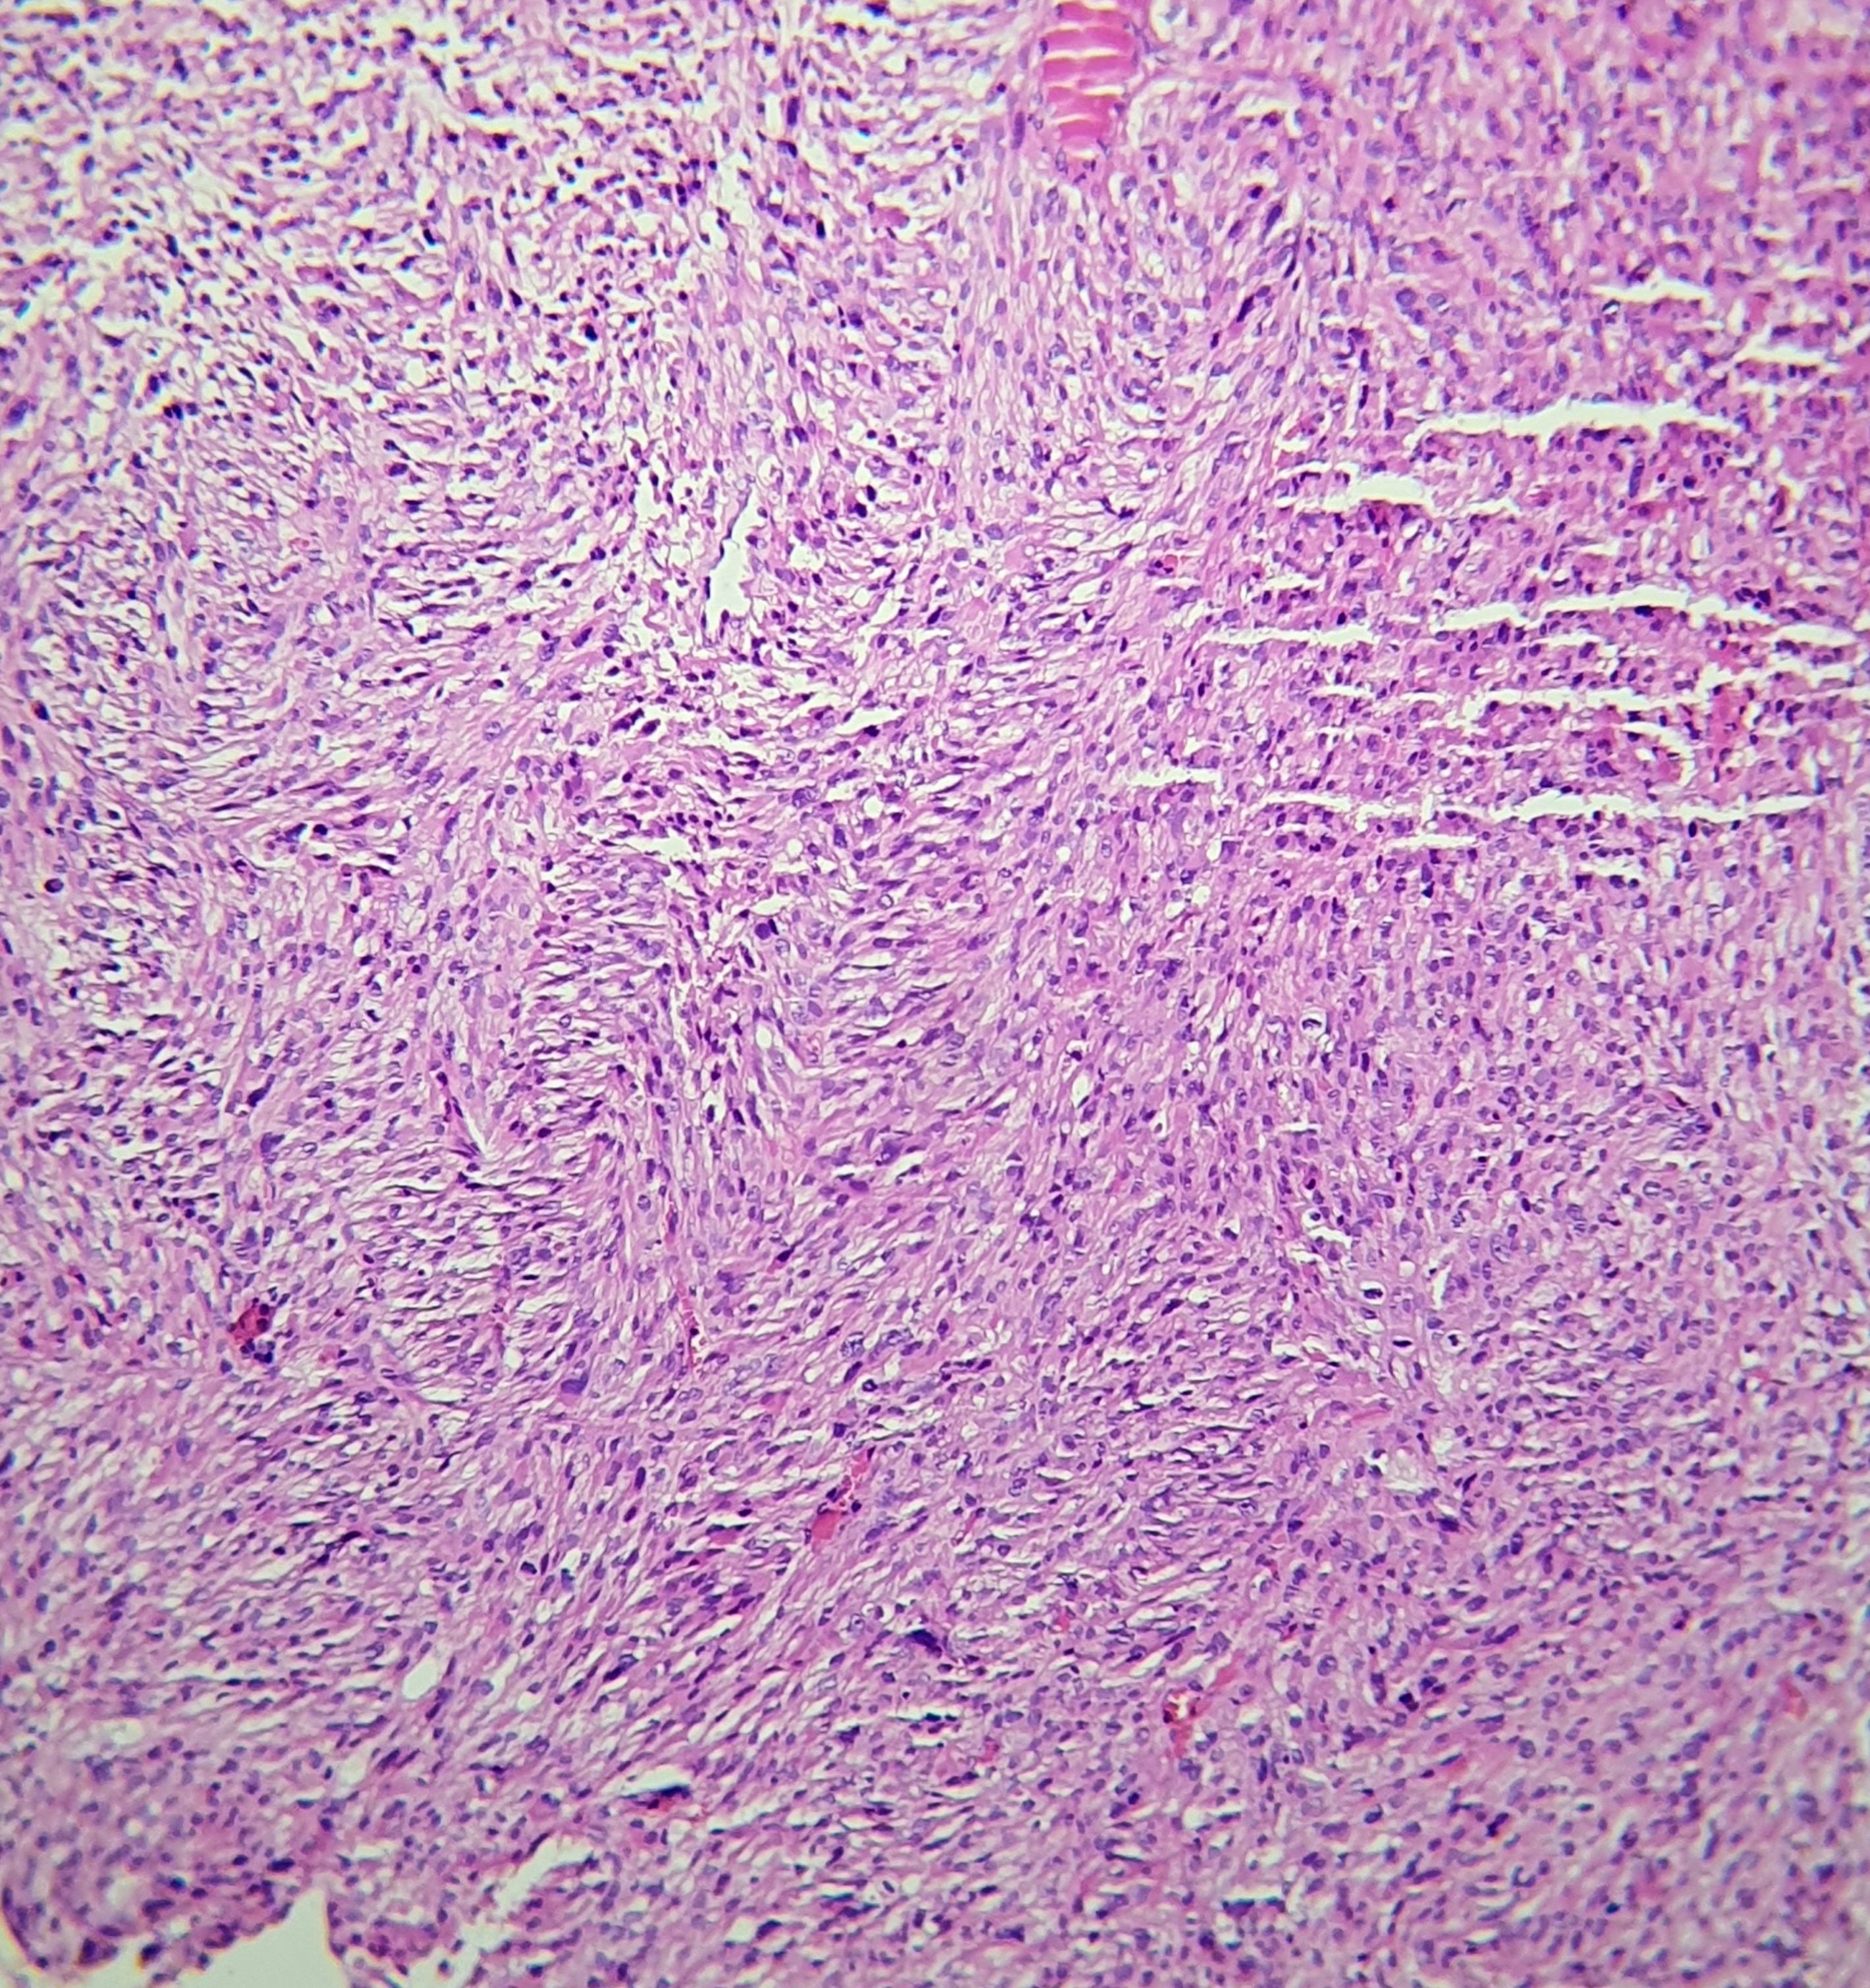 Undifferentiated pleomorphic sarcoma. Bundles of atypical neoplastic cells arranged in a storiform pattern.